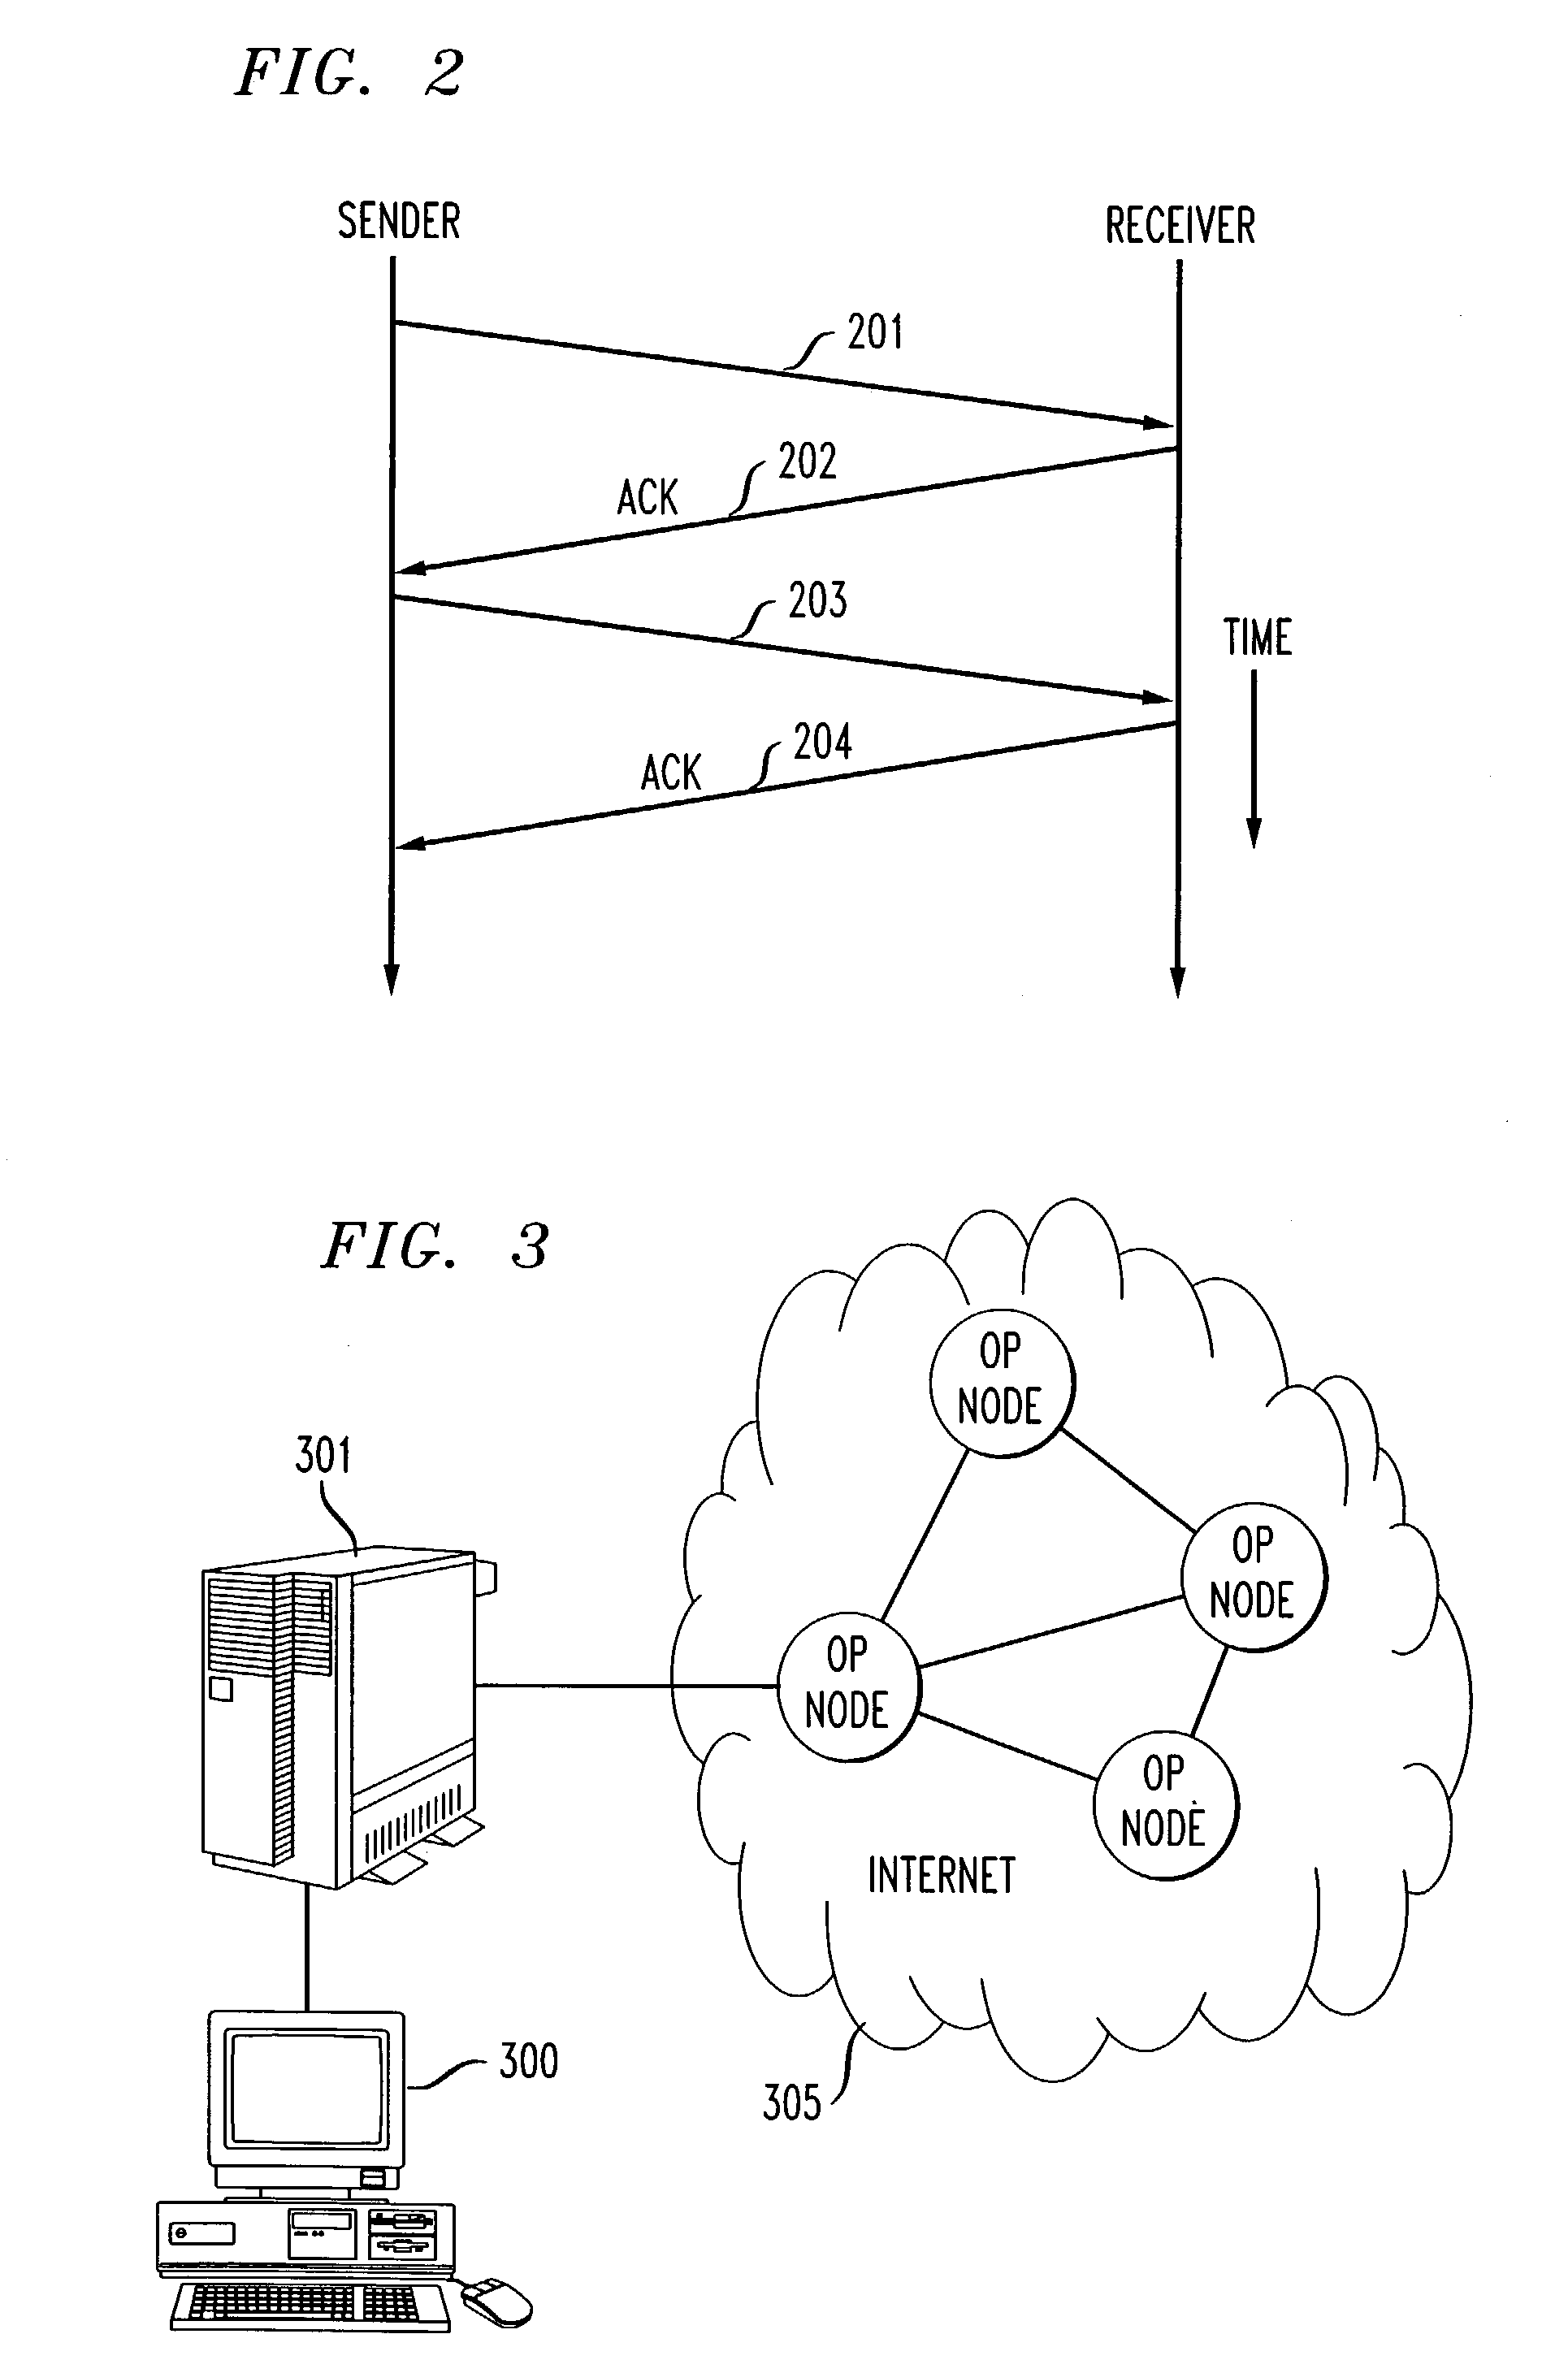 Method for reducing congestion in packet-switched networks